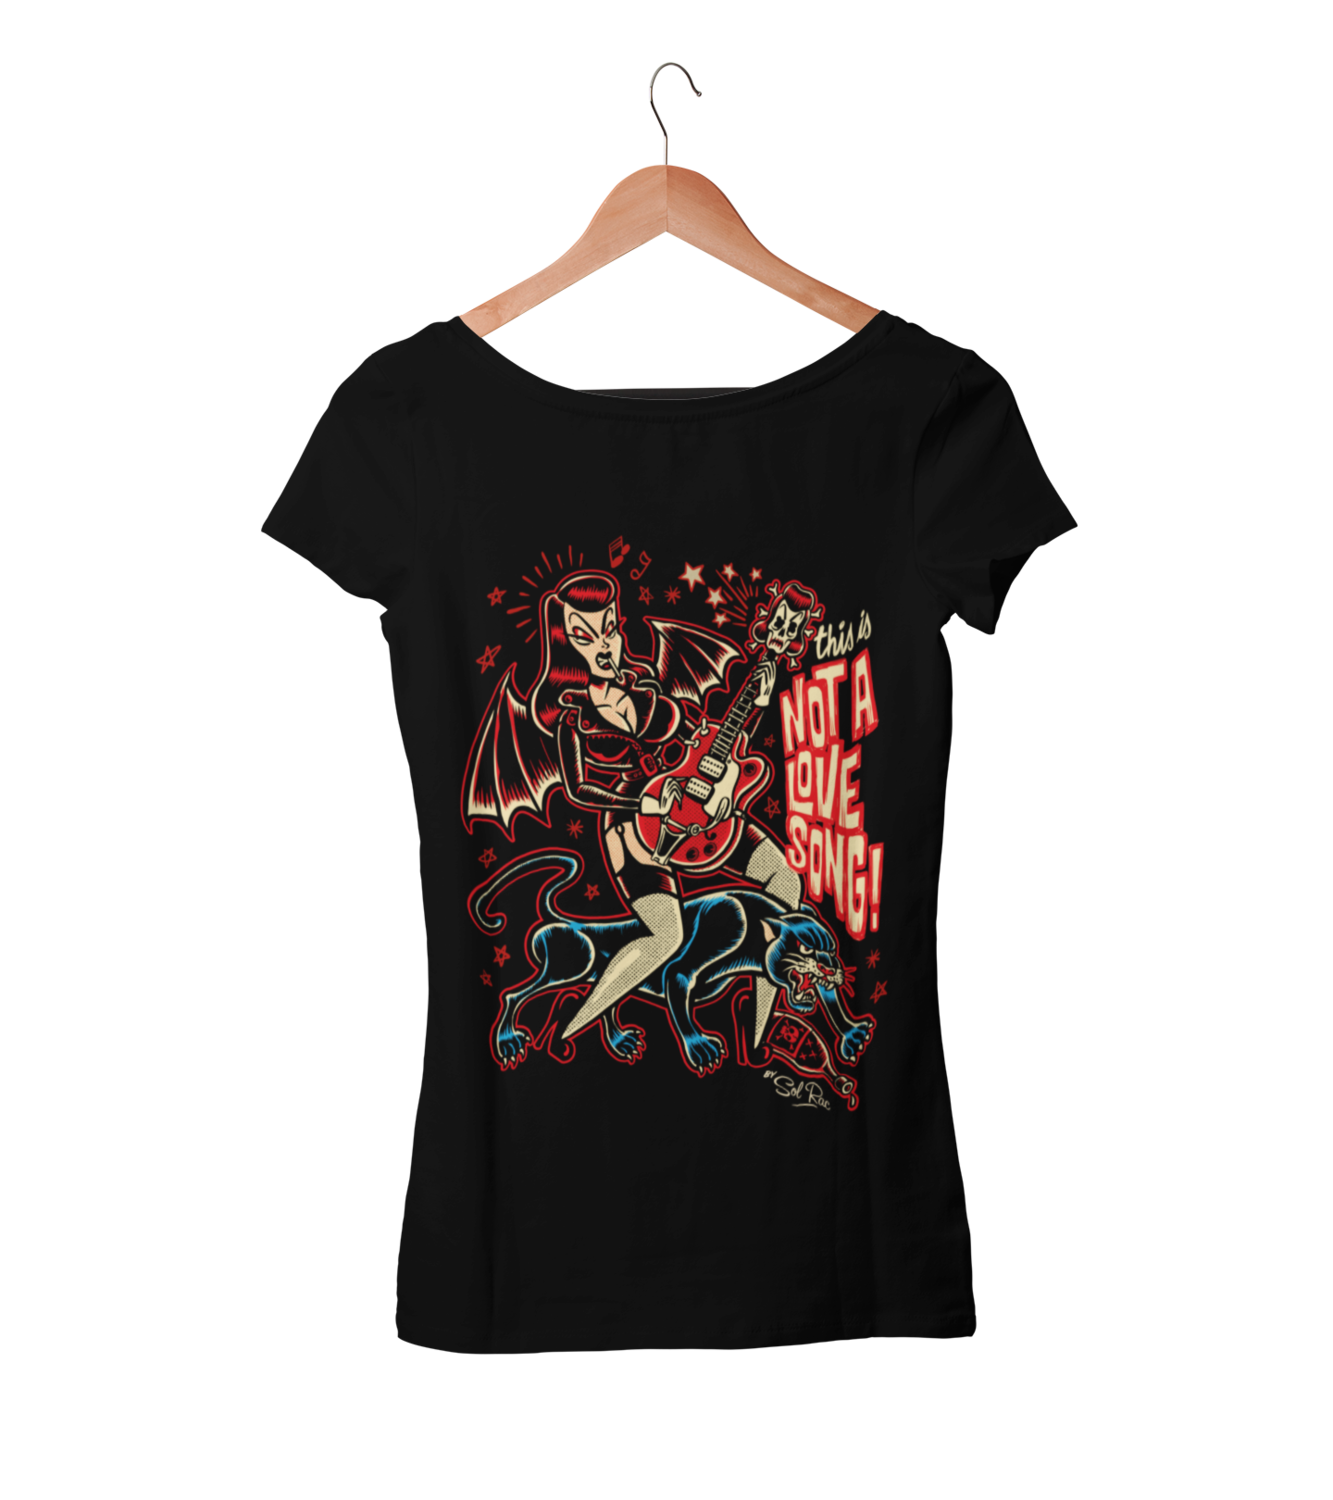 THIS IS NOT A LOVE SONG T-SHIRT WOMAN BY SOL RAC